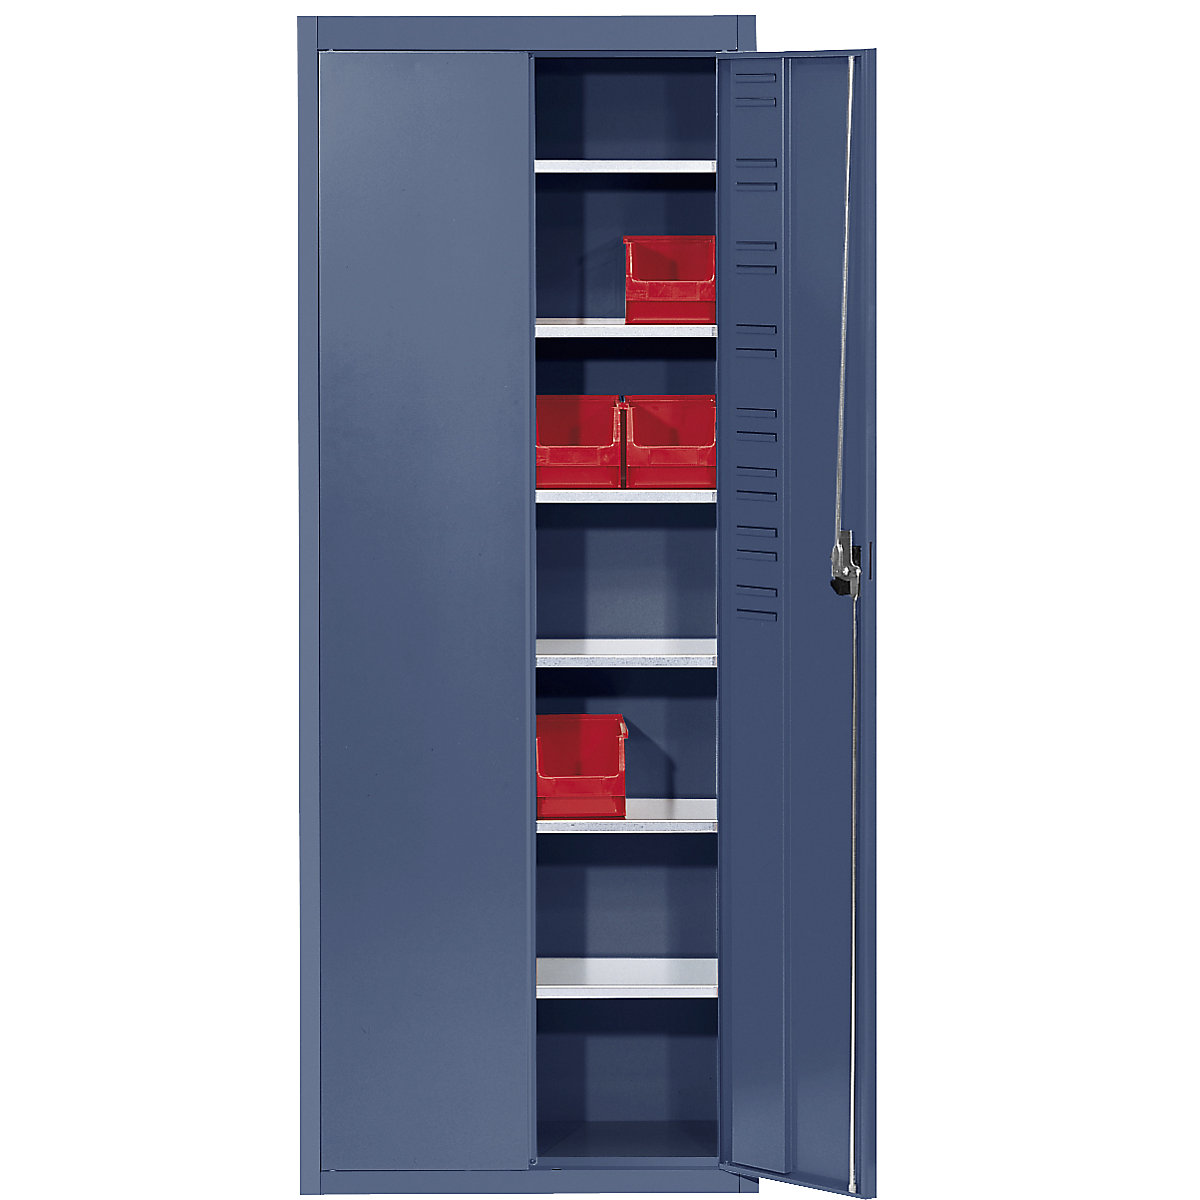 Storage cupboard, without open fronted storage bins – mauser, HxWxD 1740 x 680 x 280 mm, single colour, brilliant blue, 3+ items-6